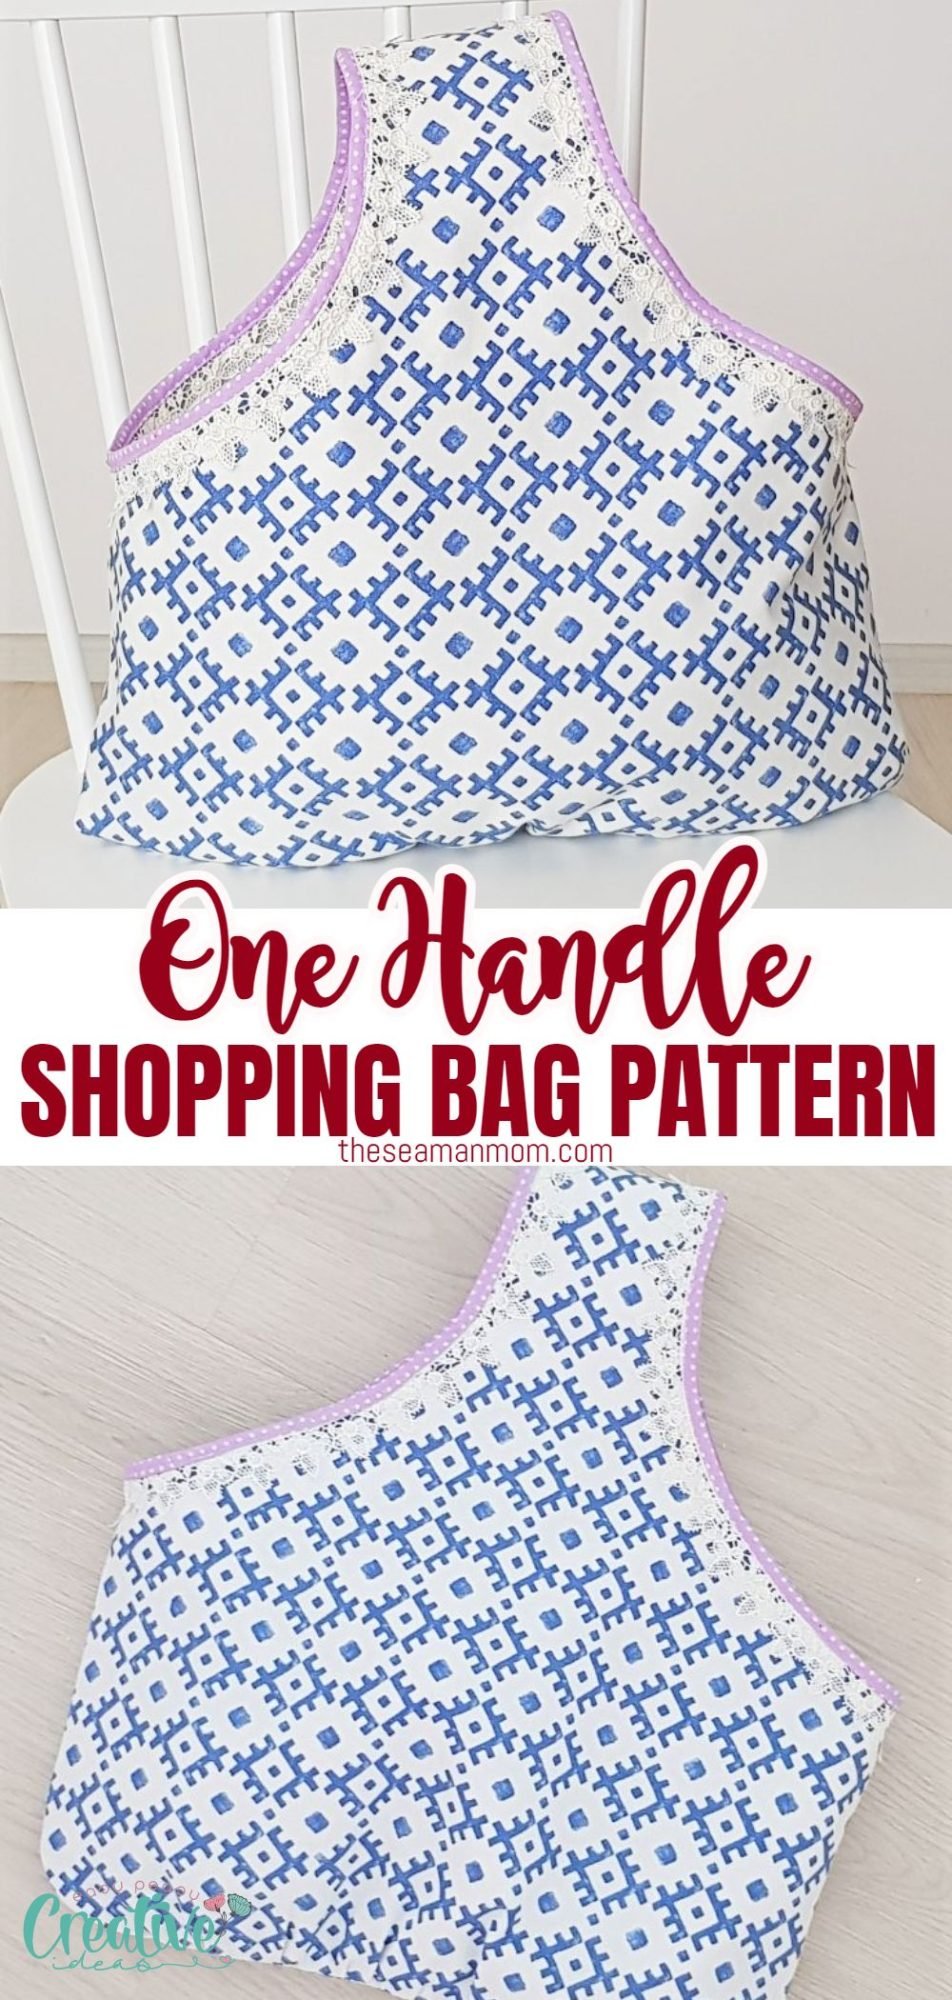 Photo collage of one handle shopping bag pattern